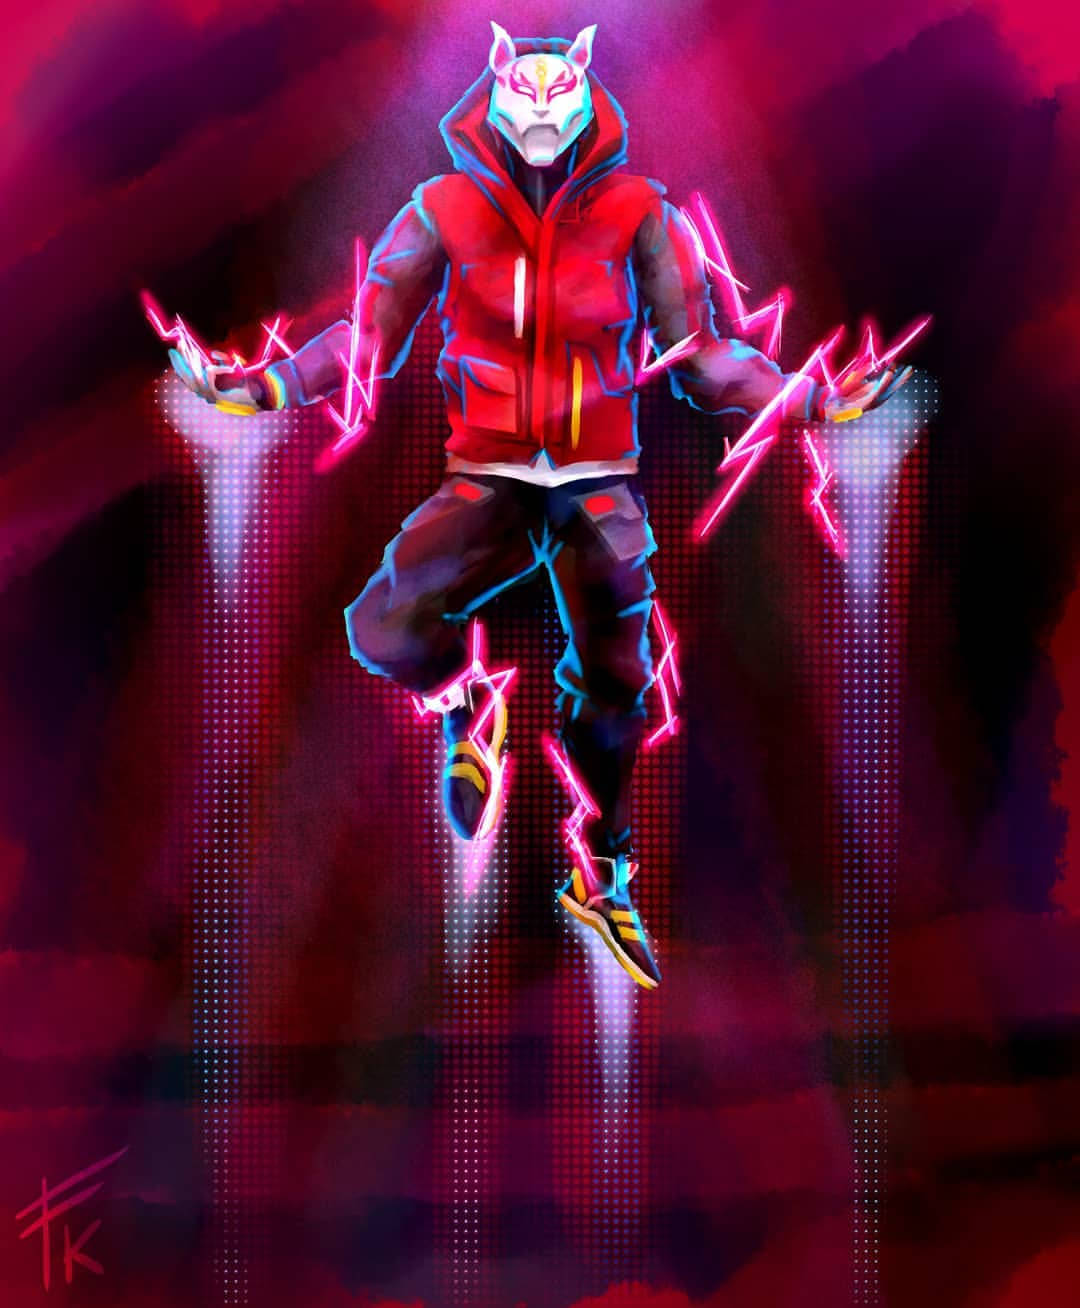 Cool Fortnite Skin Drift Jumping In Red Outfit Background